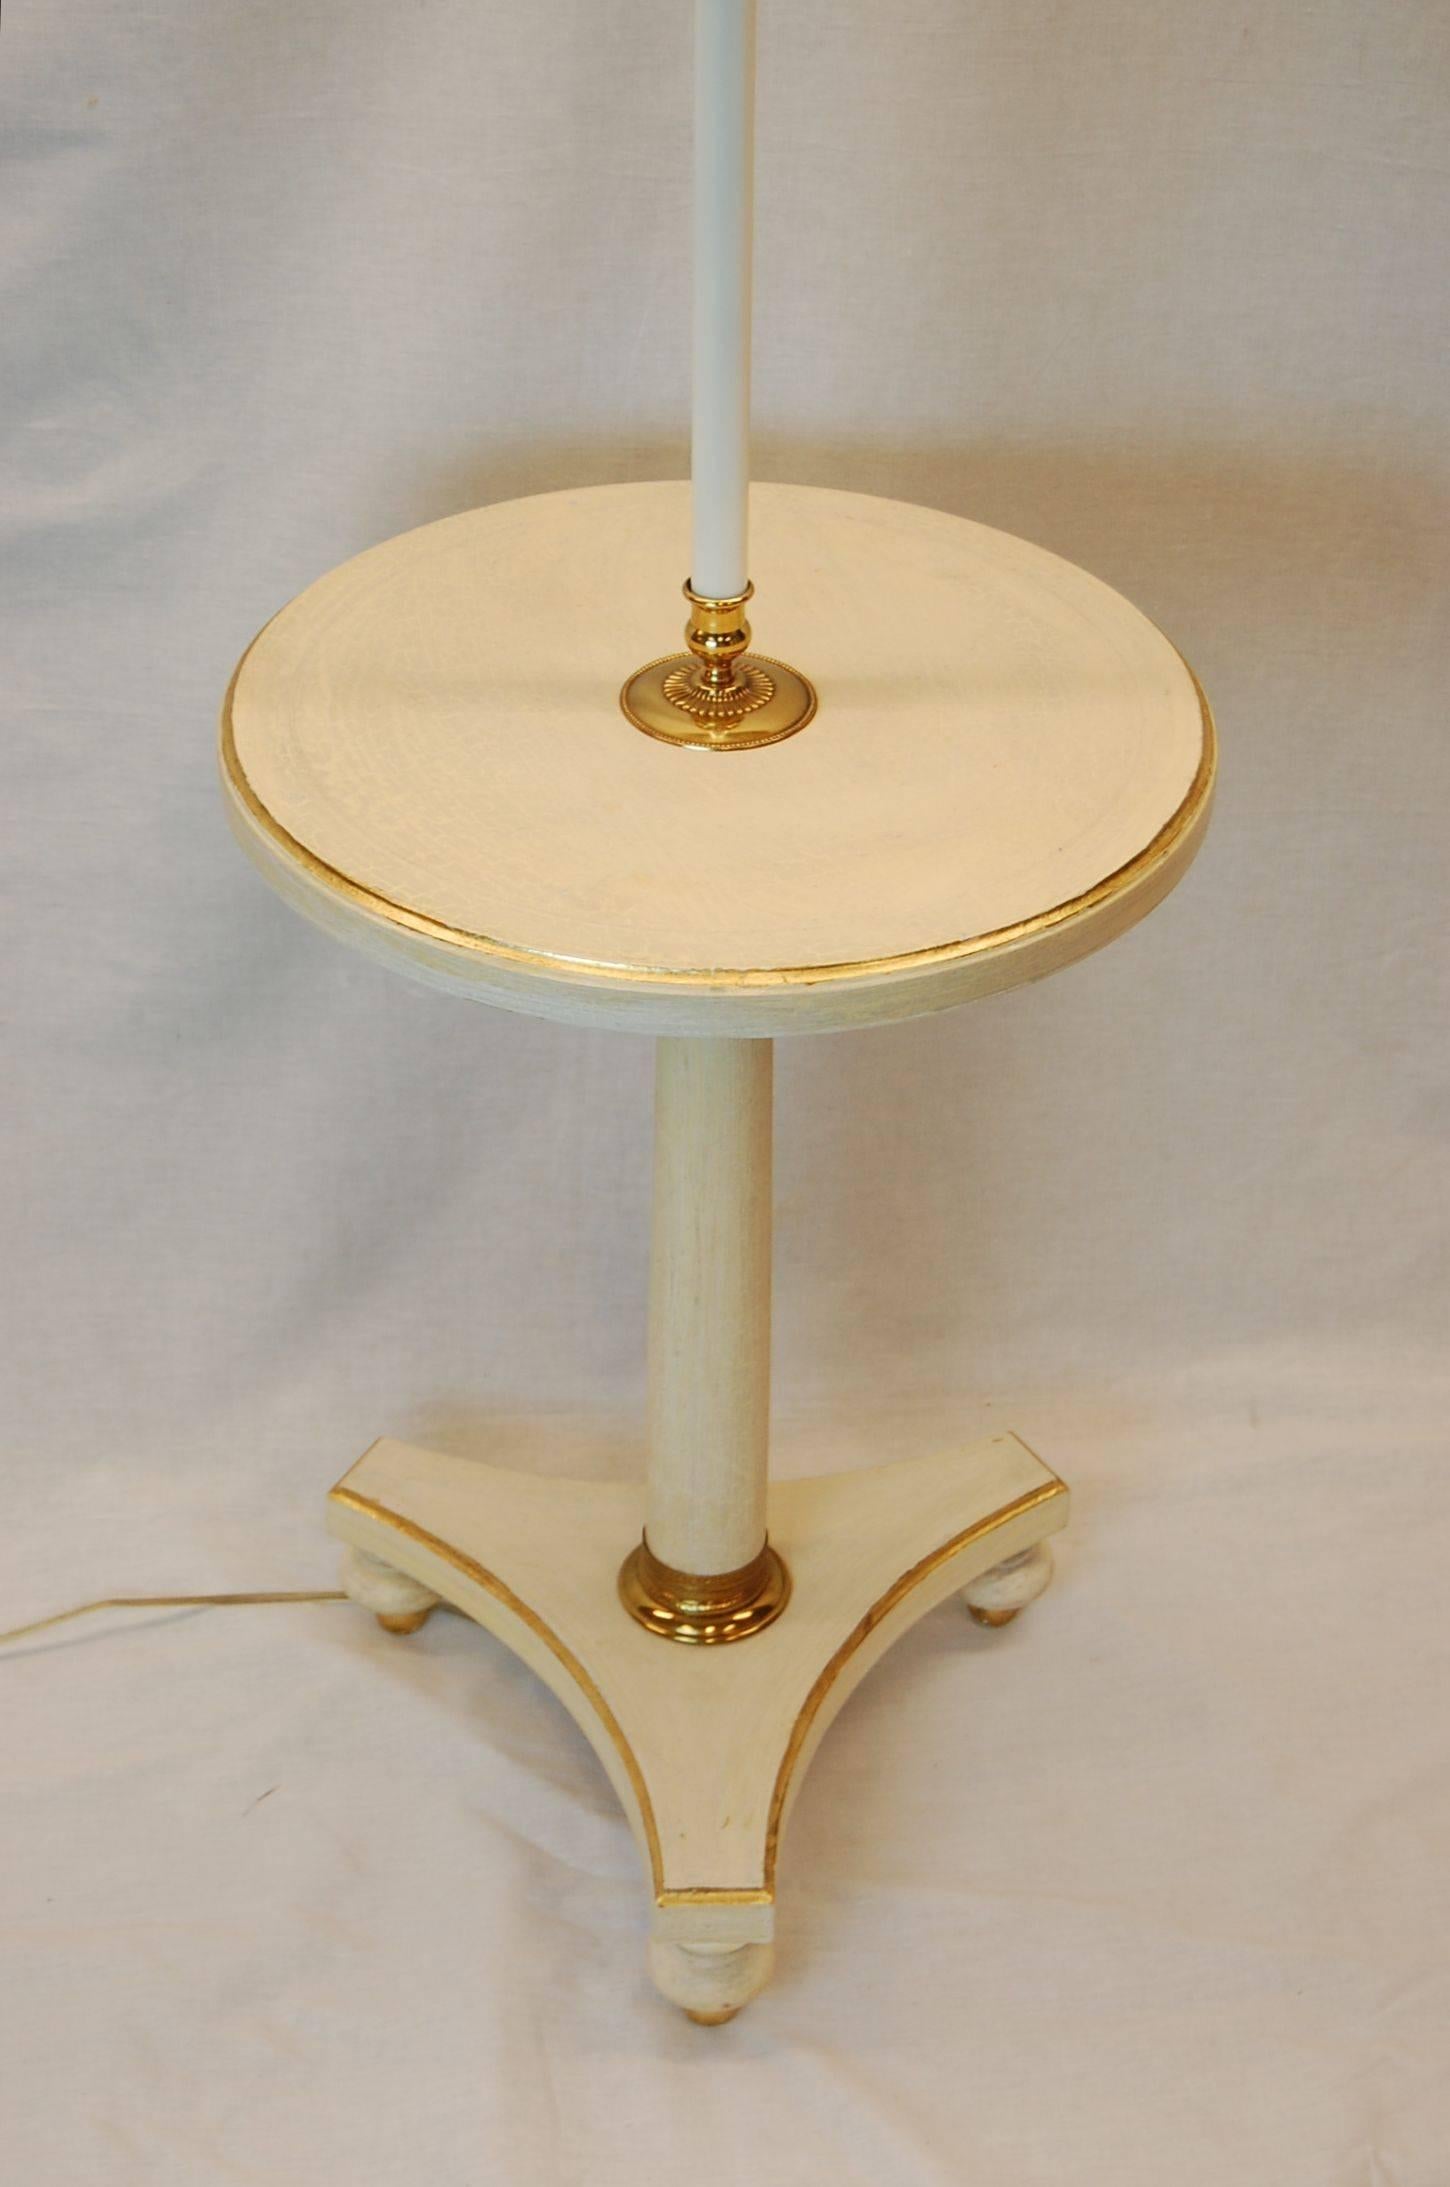 20th Century Empire Style Floor Lamp in Crackled White Painted Finish In Excellent Condition For Sale In Pittsburgh, PA